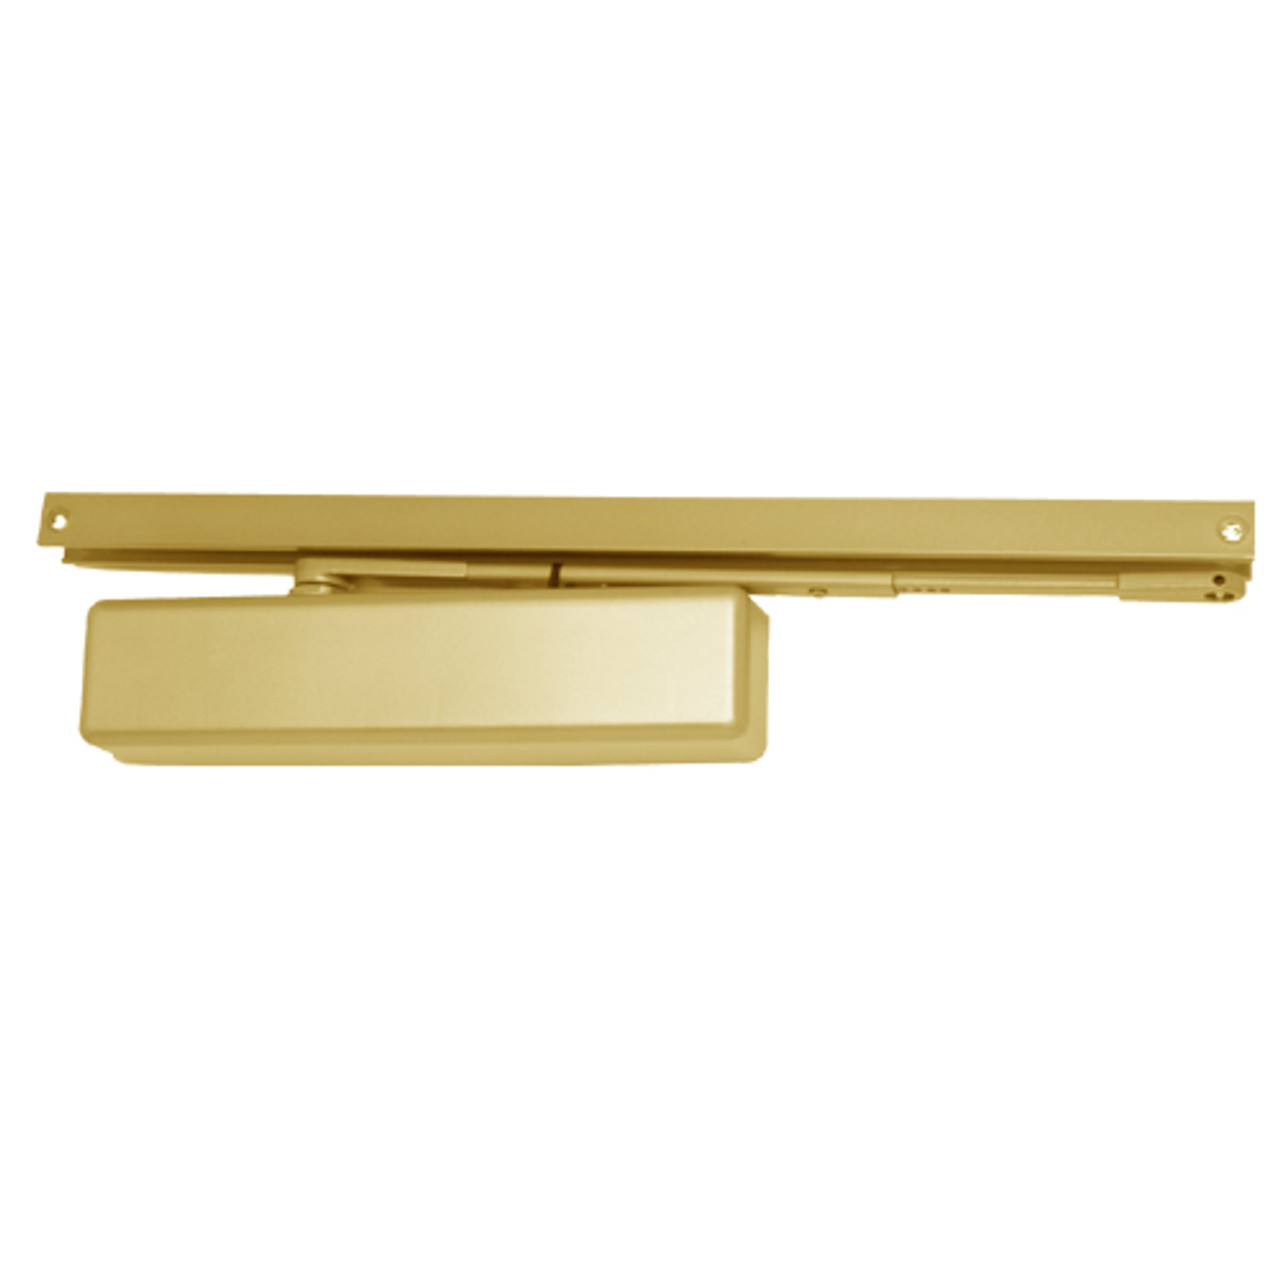 1460T-H-BUMPER-BRASS-DS LCN Surface Mount Door Closer with Hold Open Track with Bumper in Brass Finish